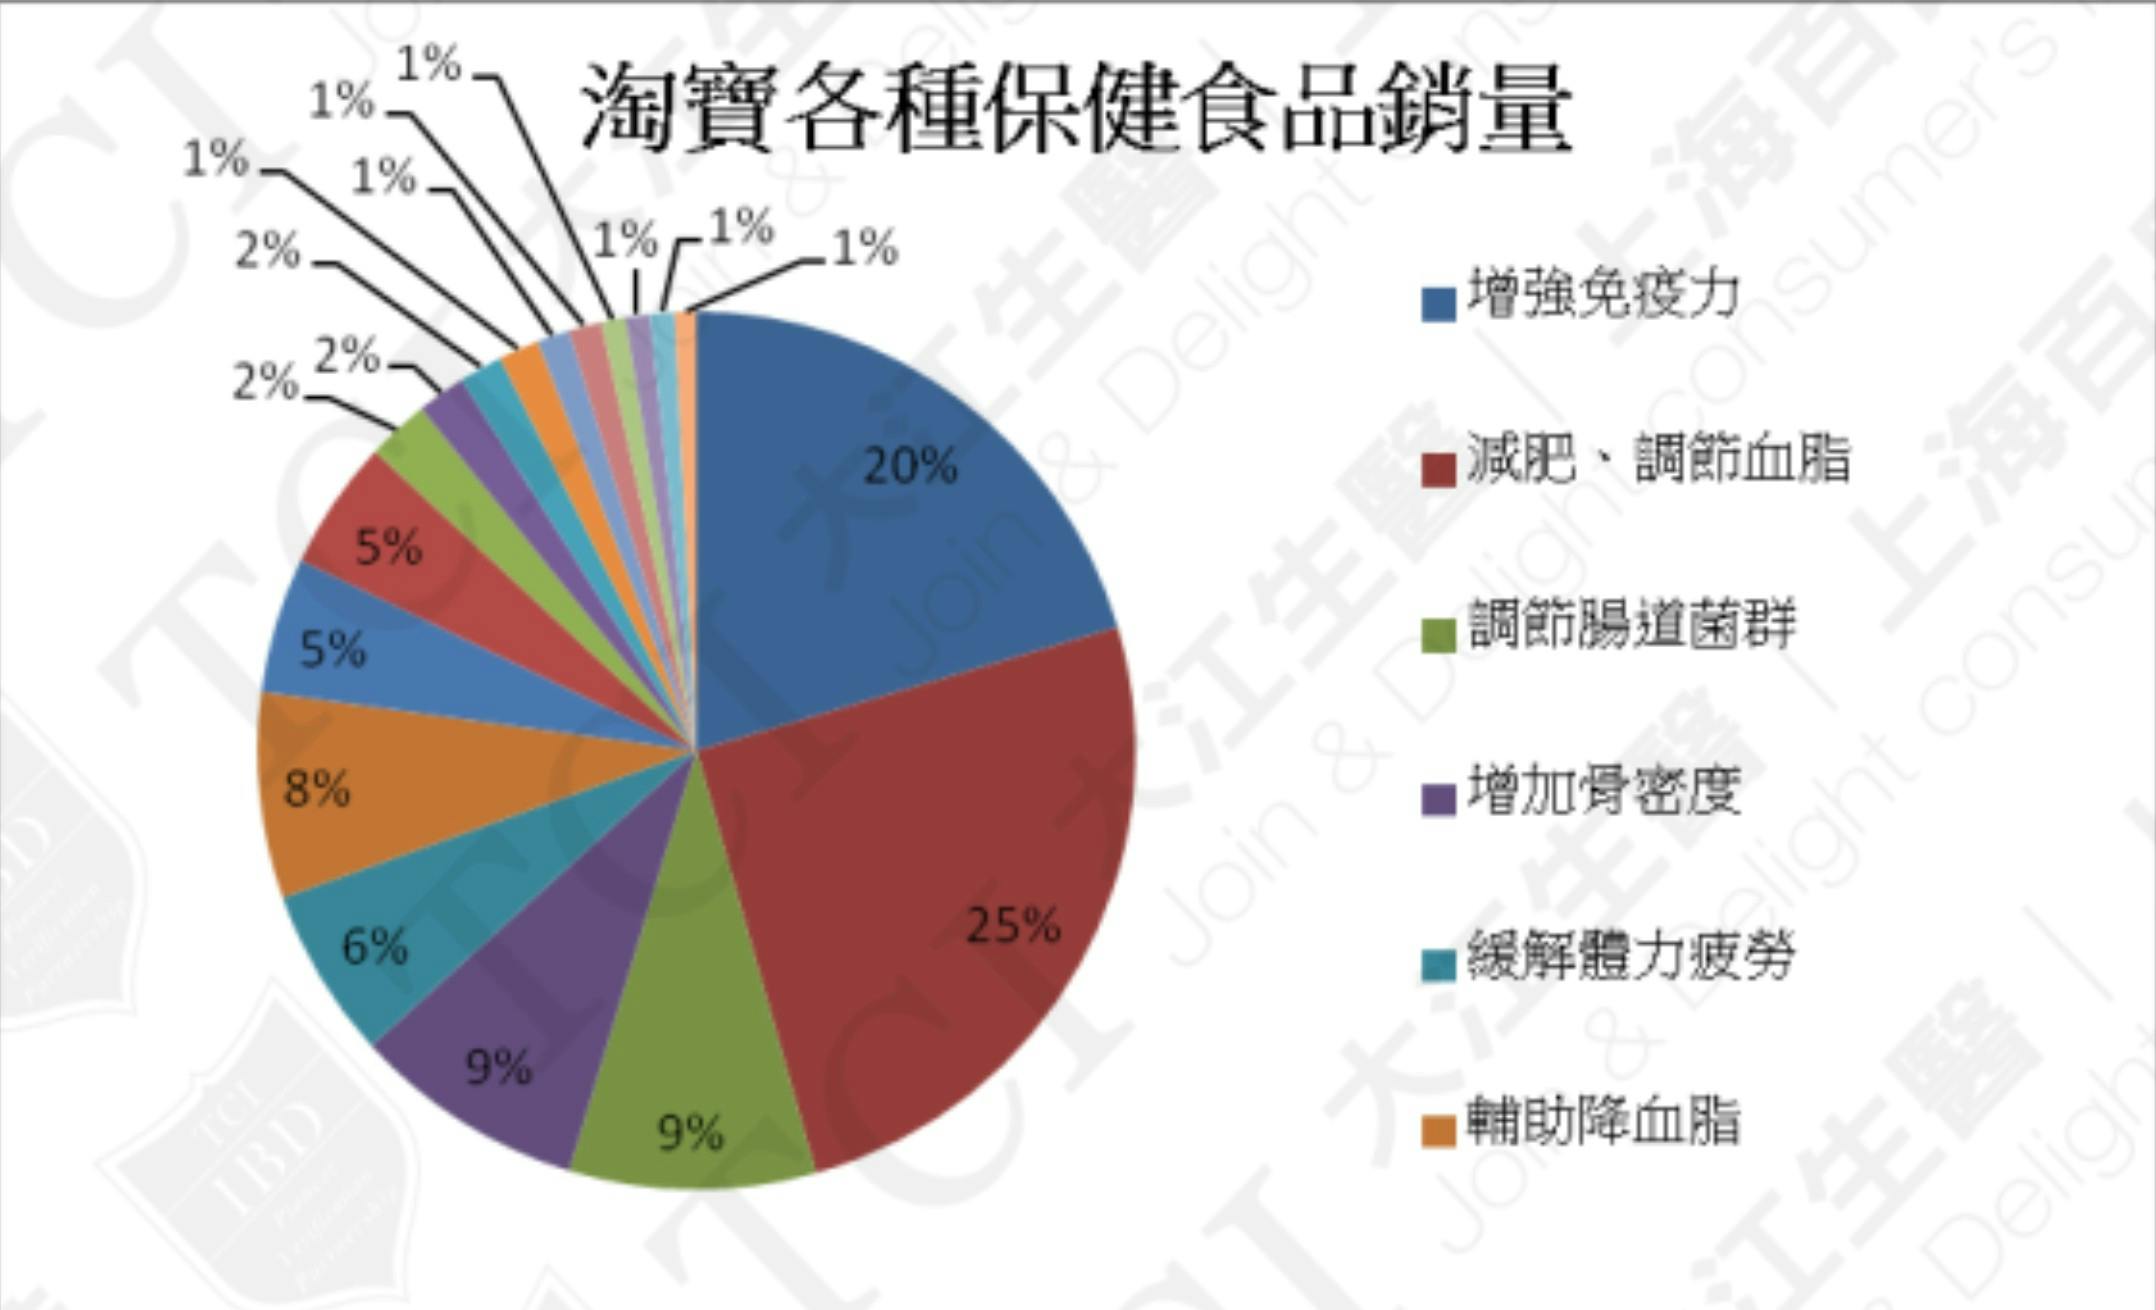 The sales of different categories of dietary supplements on Taobao, Datasource: Taobao